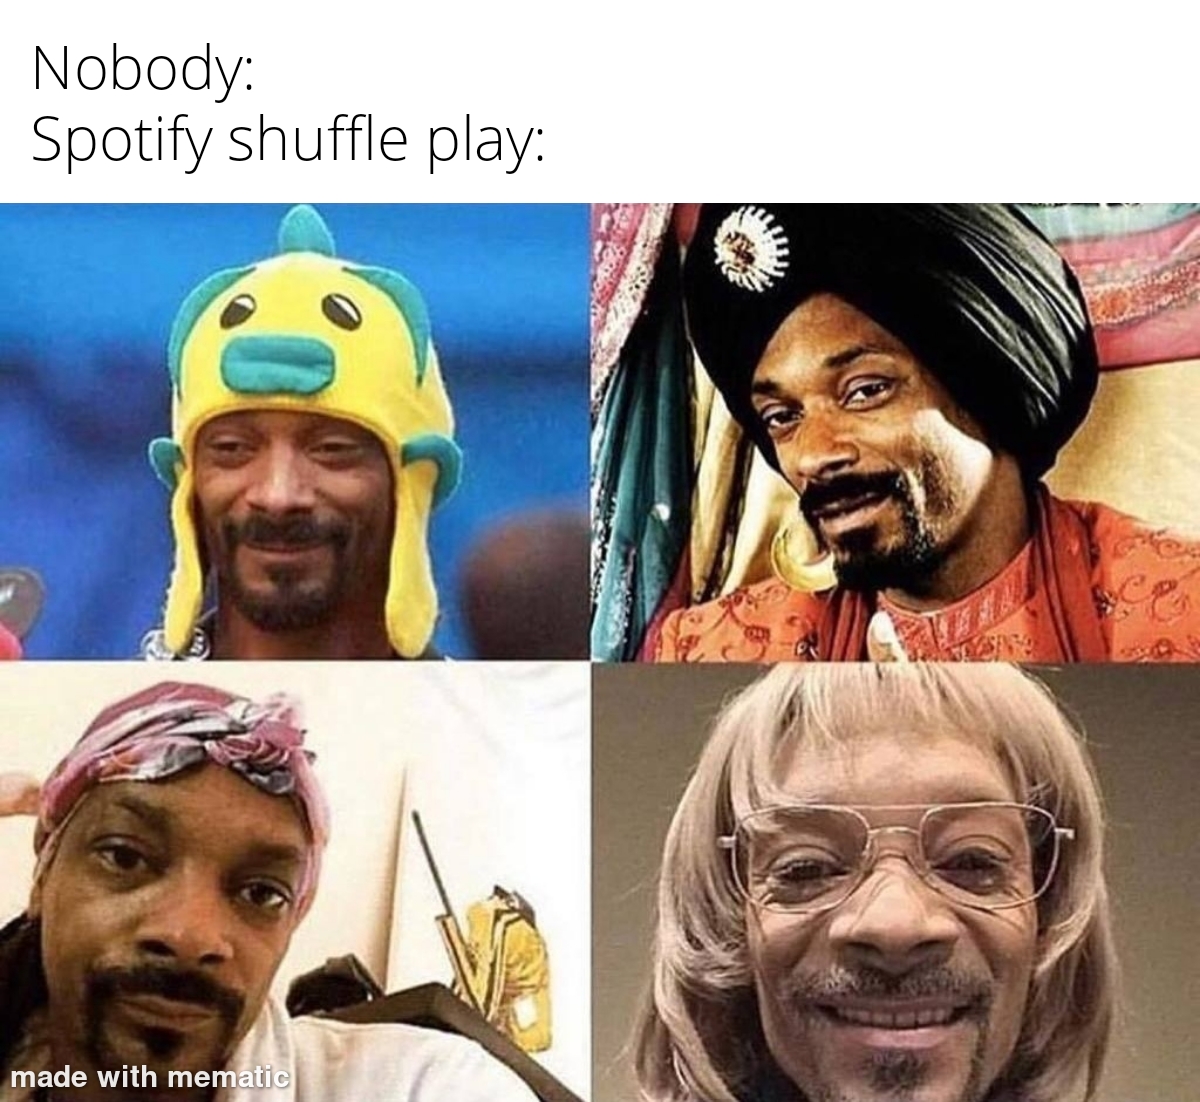 funny memes - dank memes - different netflix account meme - Nobody Spotify shuffle play made with mematic